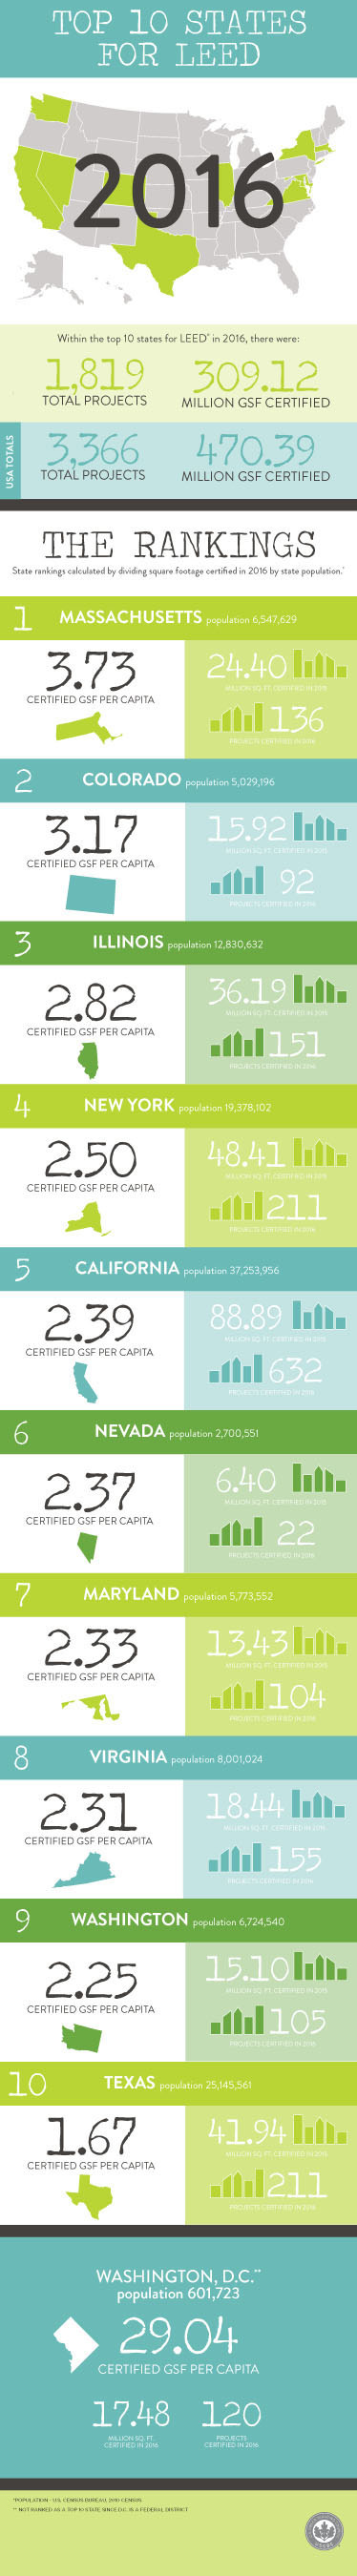 Top 10 States for LEED 2016 Infographic